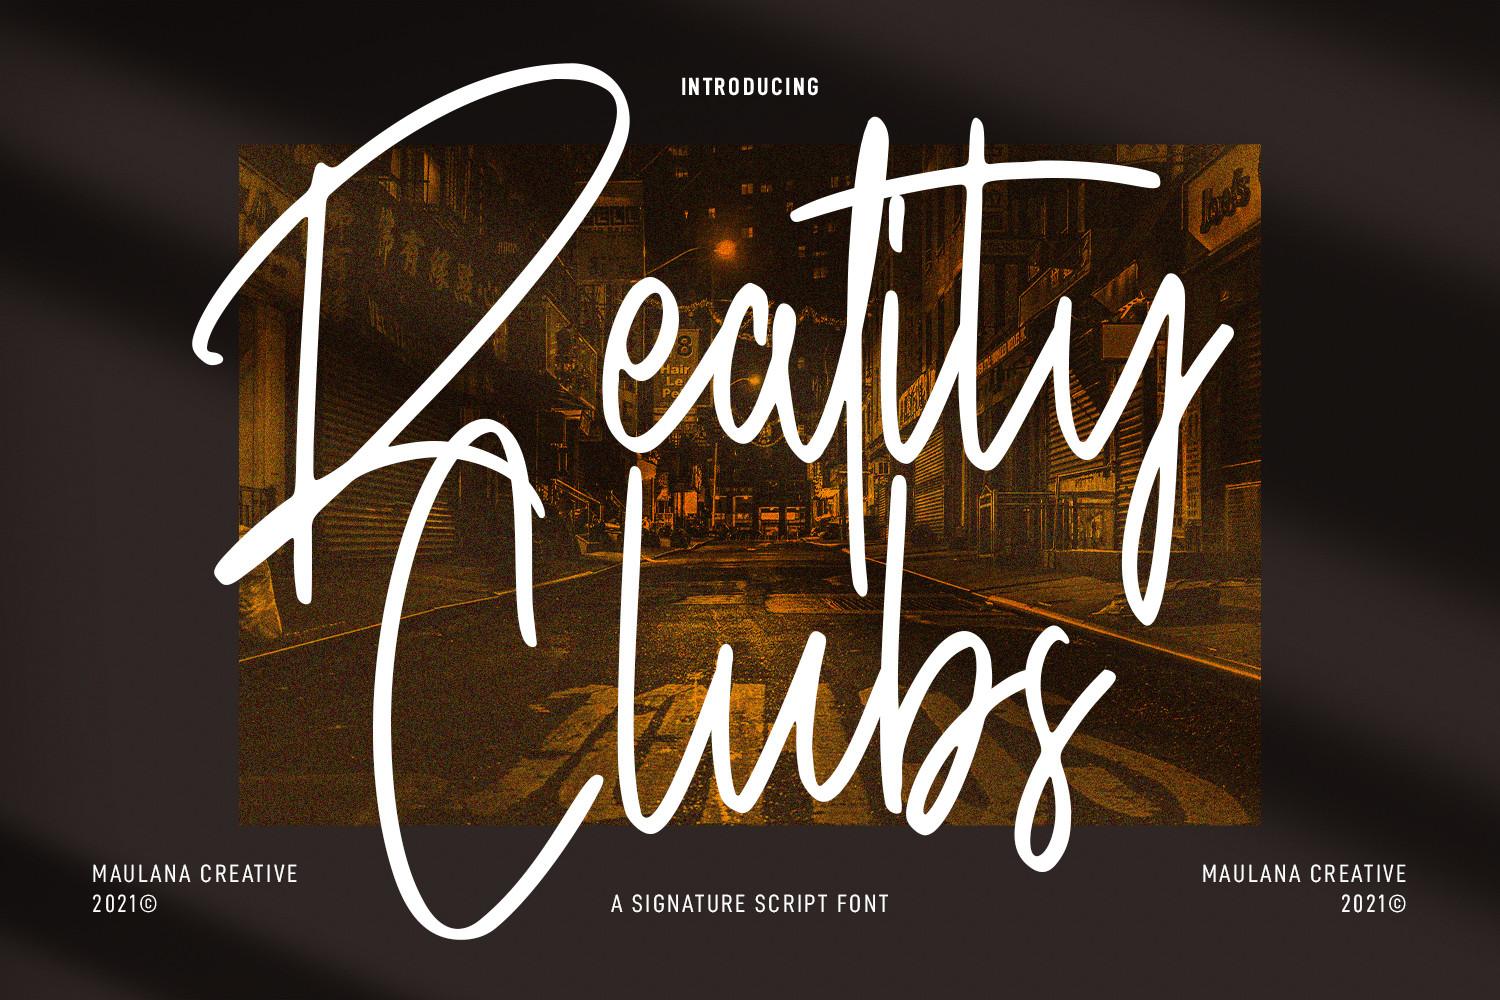 Reality Clubs Font